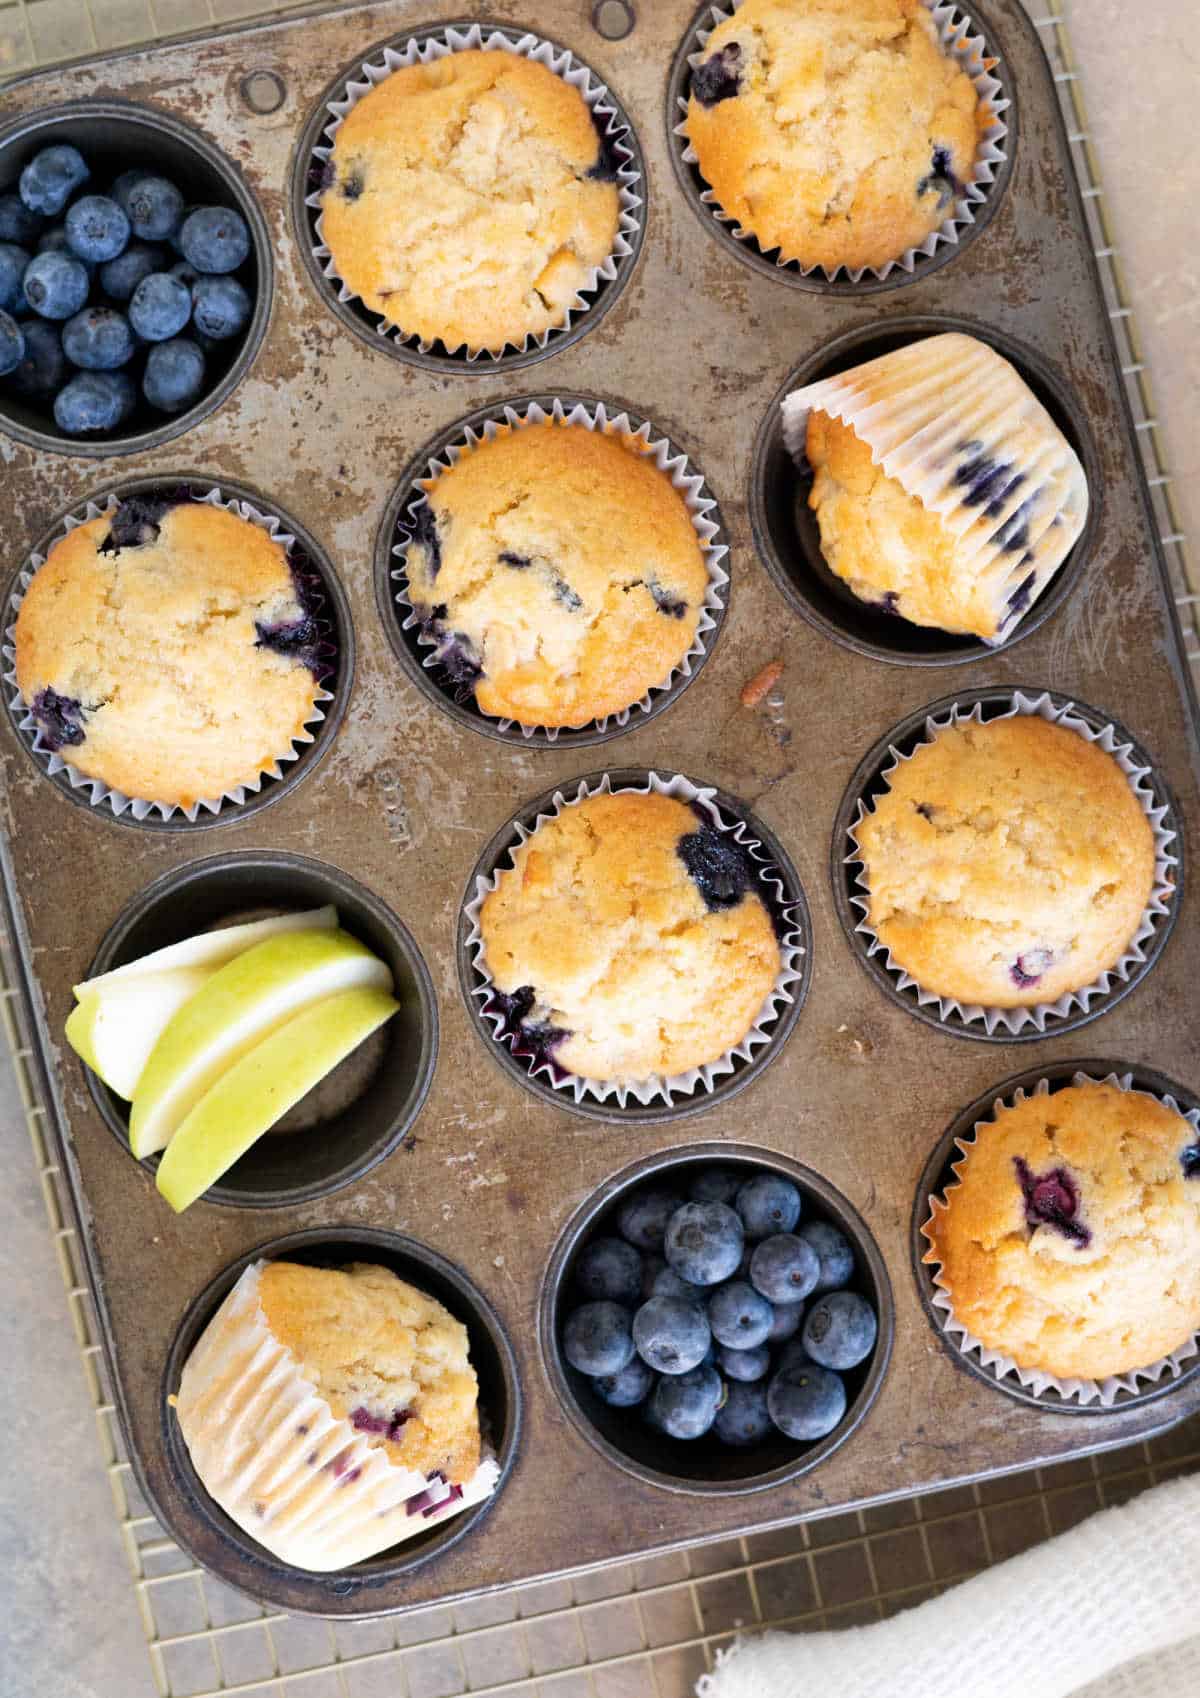 Top view of metal muffin pan with apple blueberry muffins and pieces of said fruit.